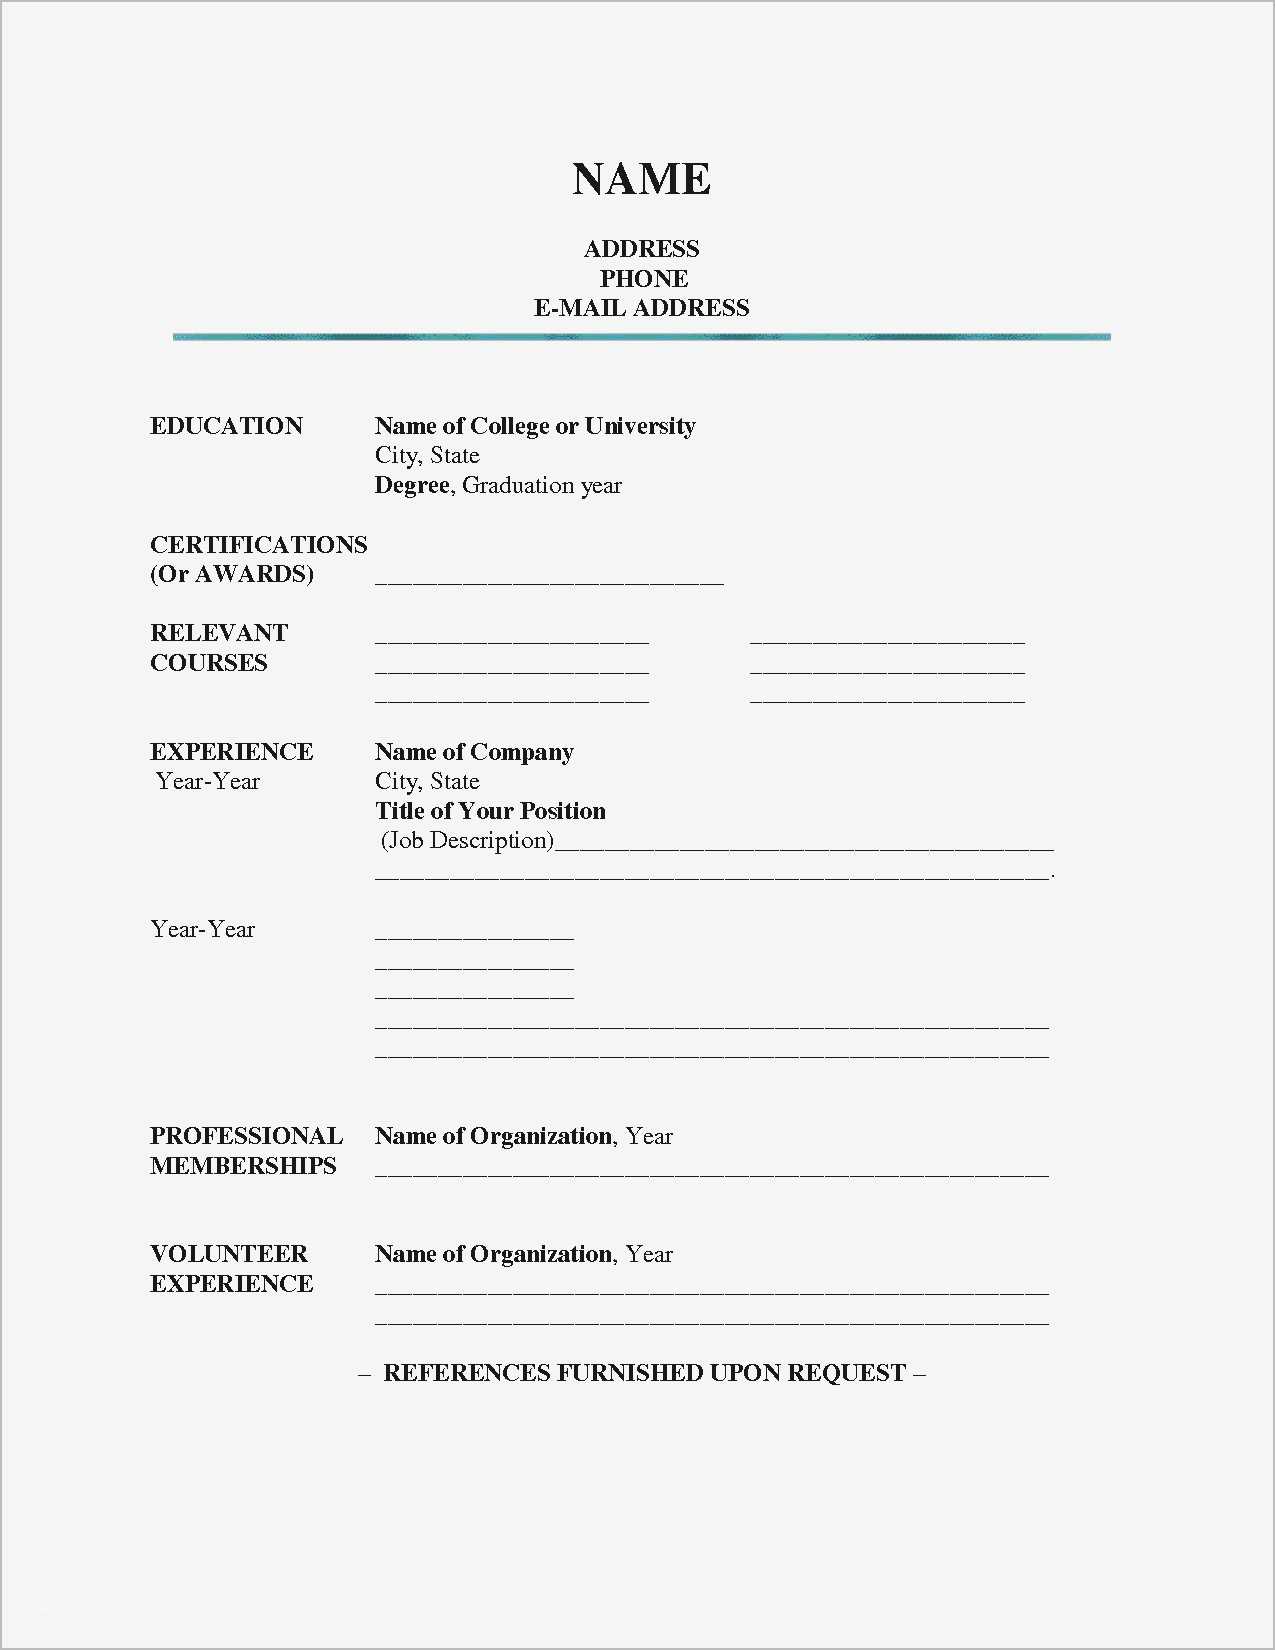 Art History Worksheets Pdf with Blank Resume Pdf Unique Fill In the Blank Resume Worksheet New Free